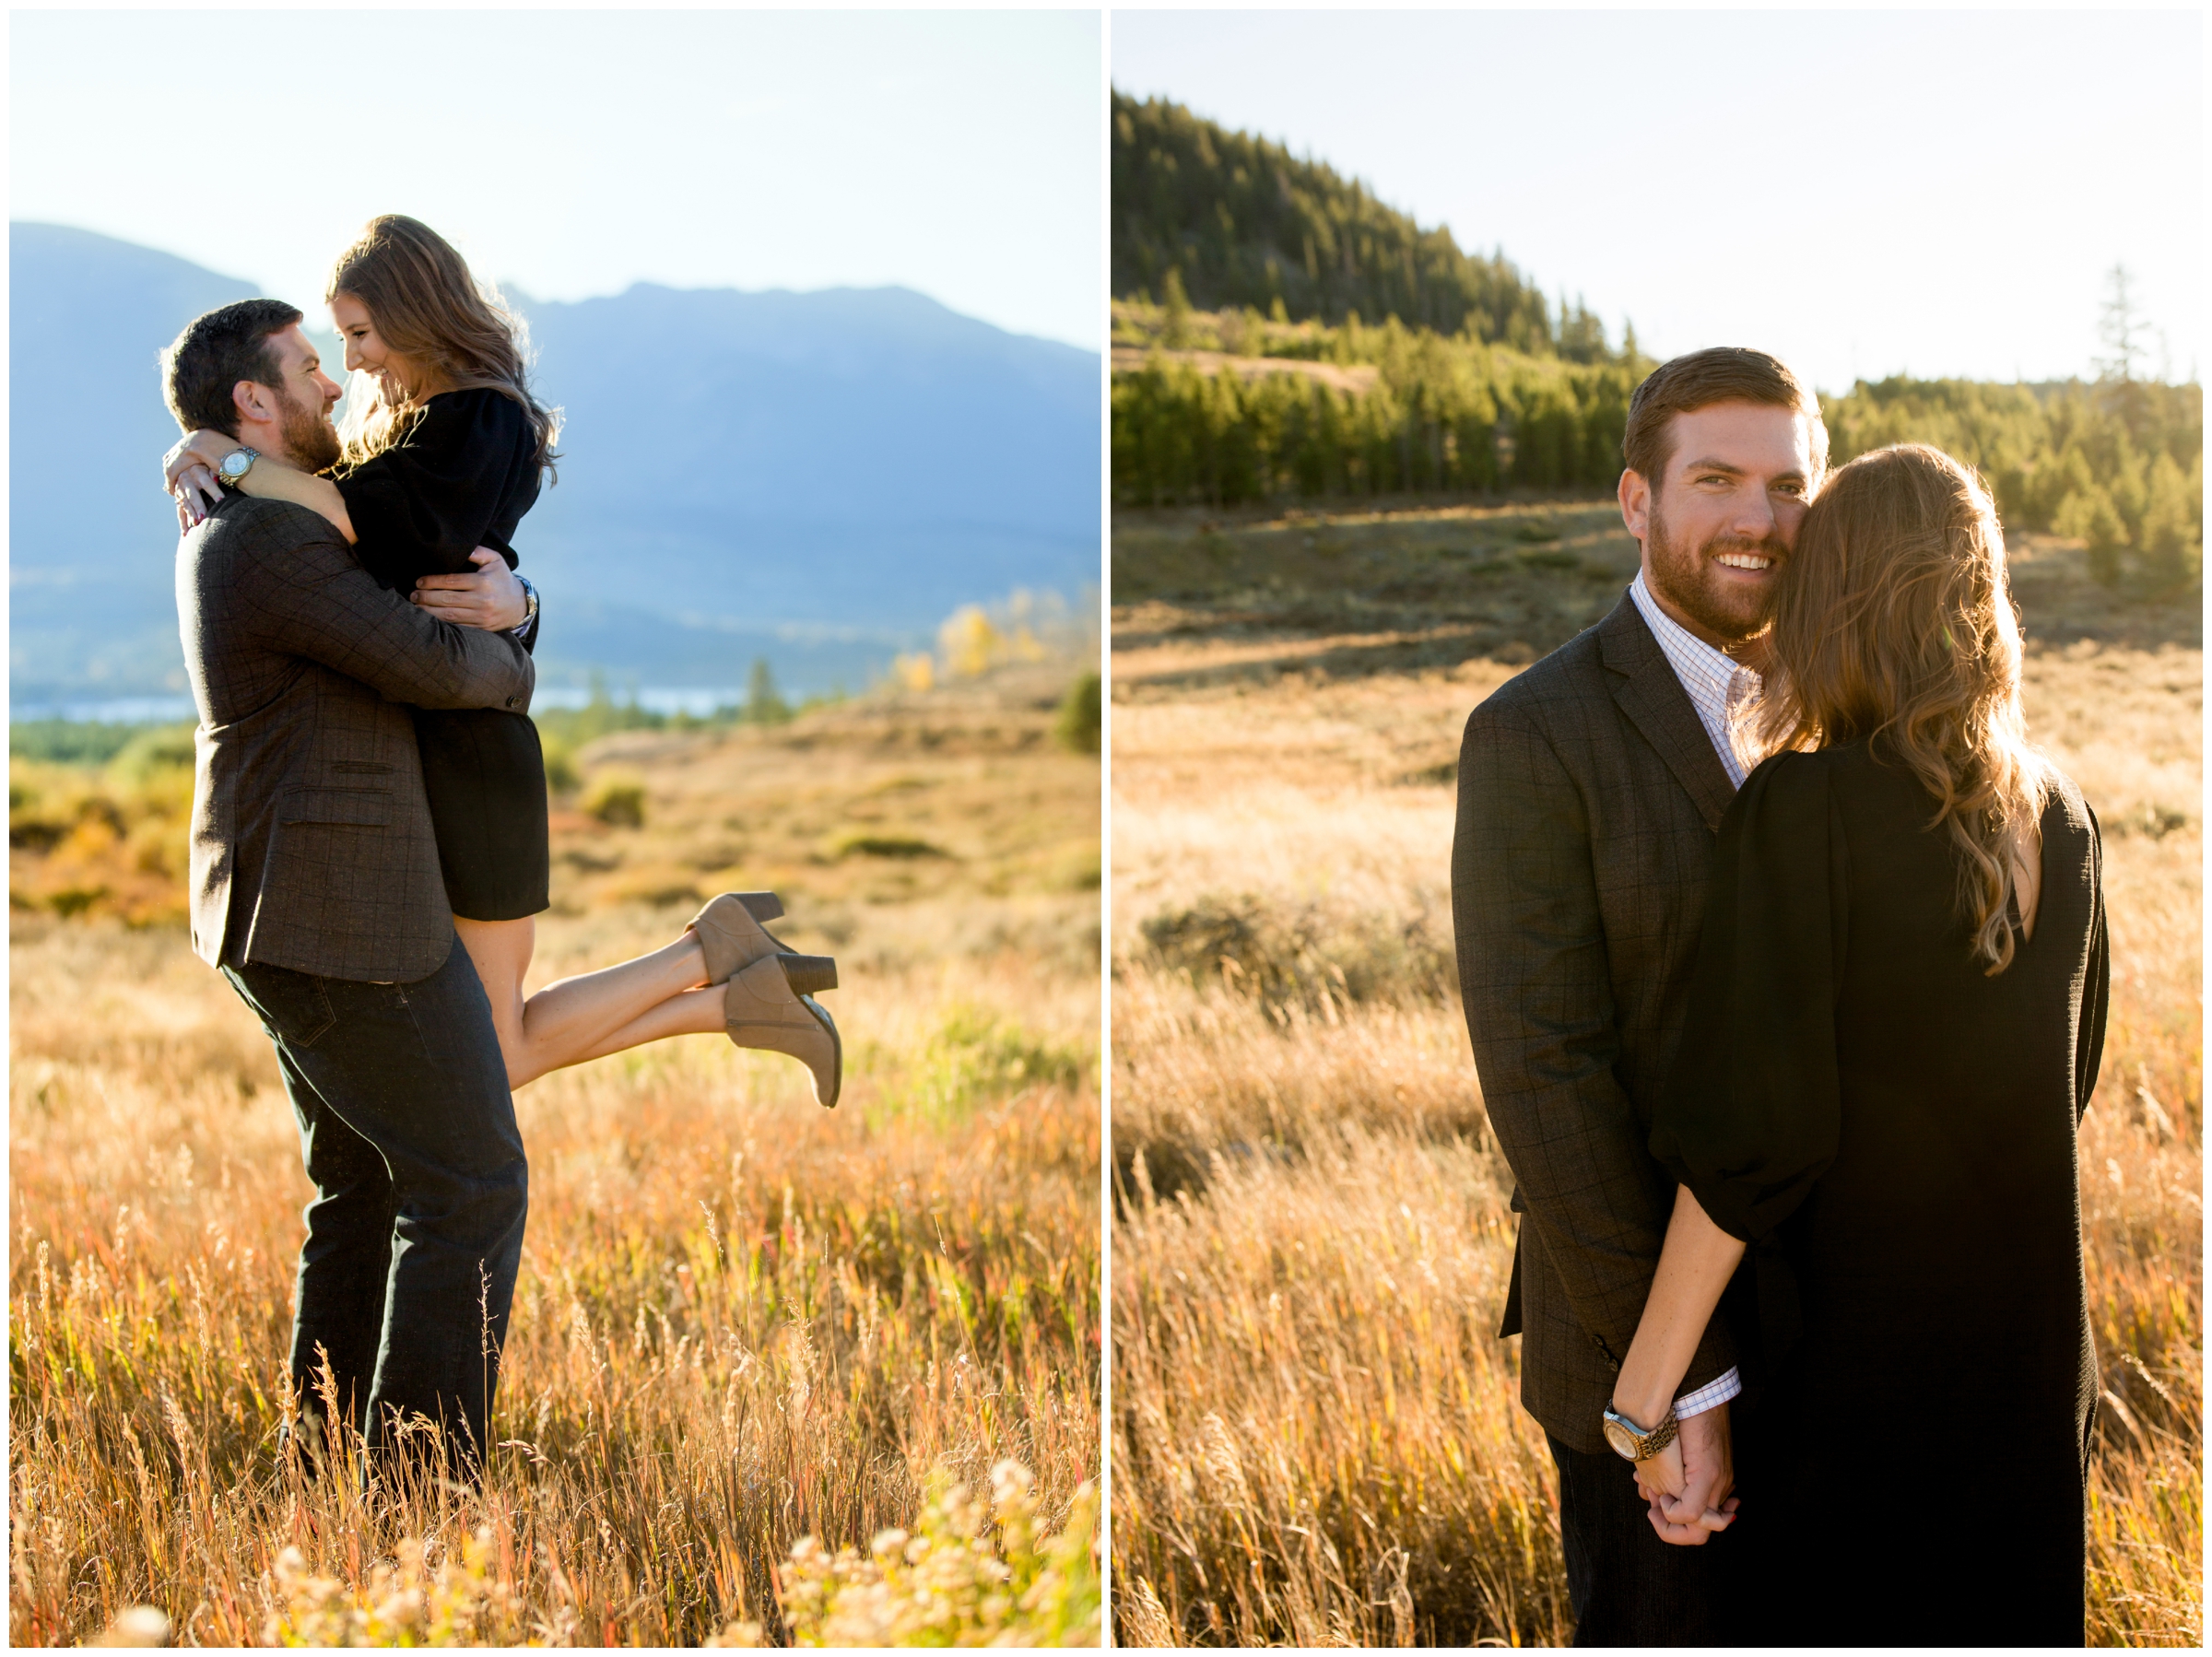 guy lifting girl during Breckenridge Colorado engagement photography session in the mountains 